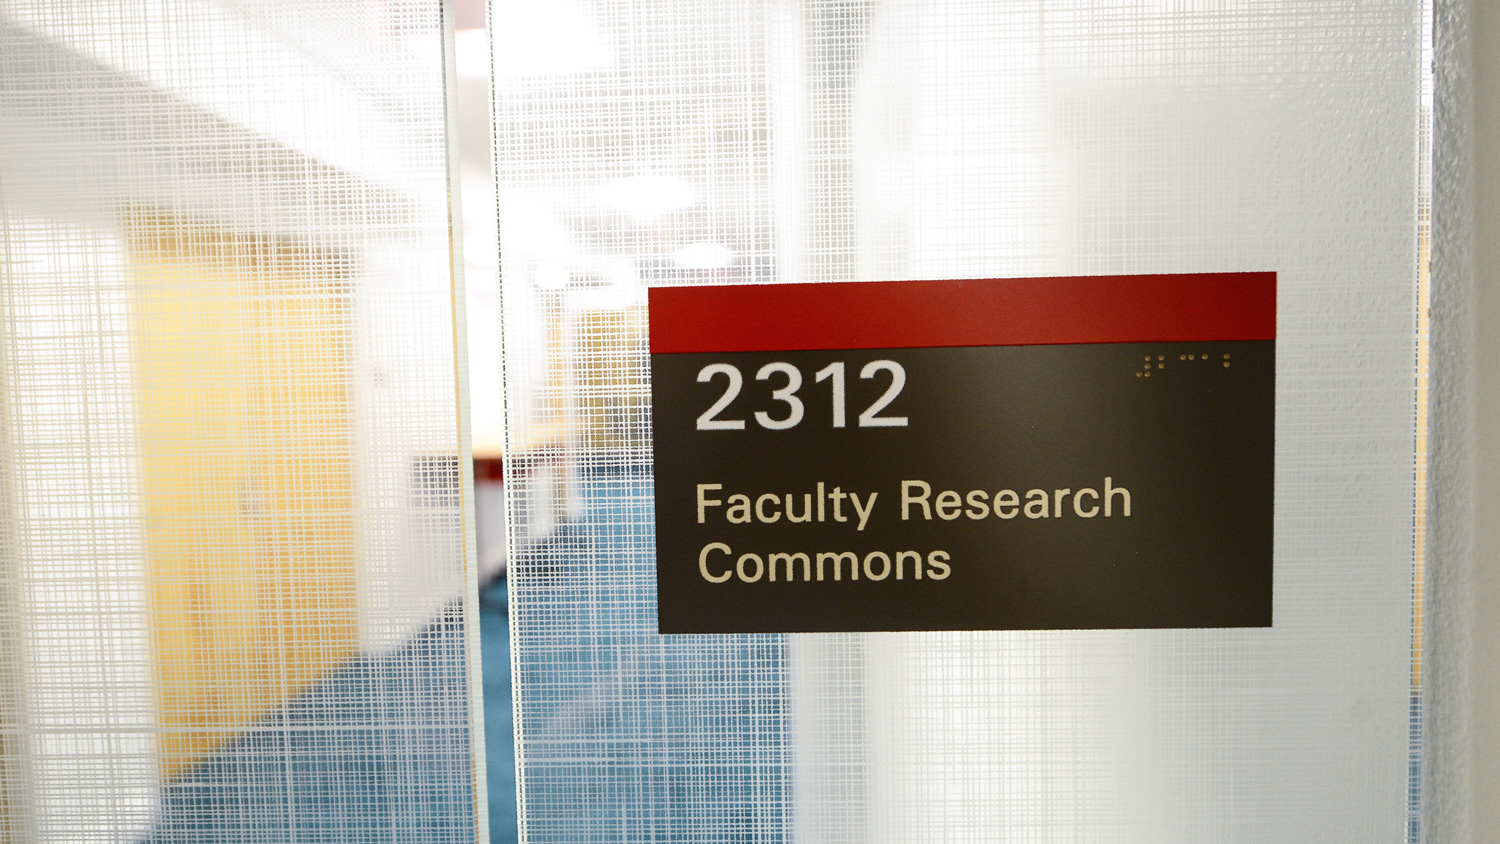 Faculty Research Commons room